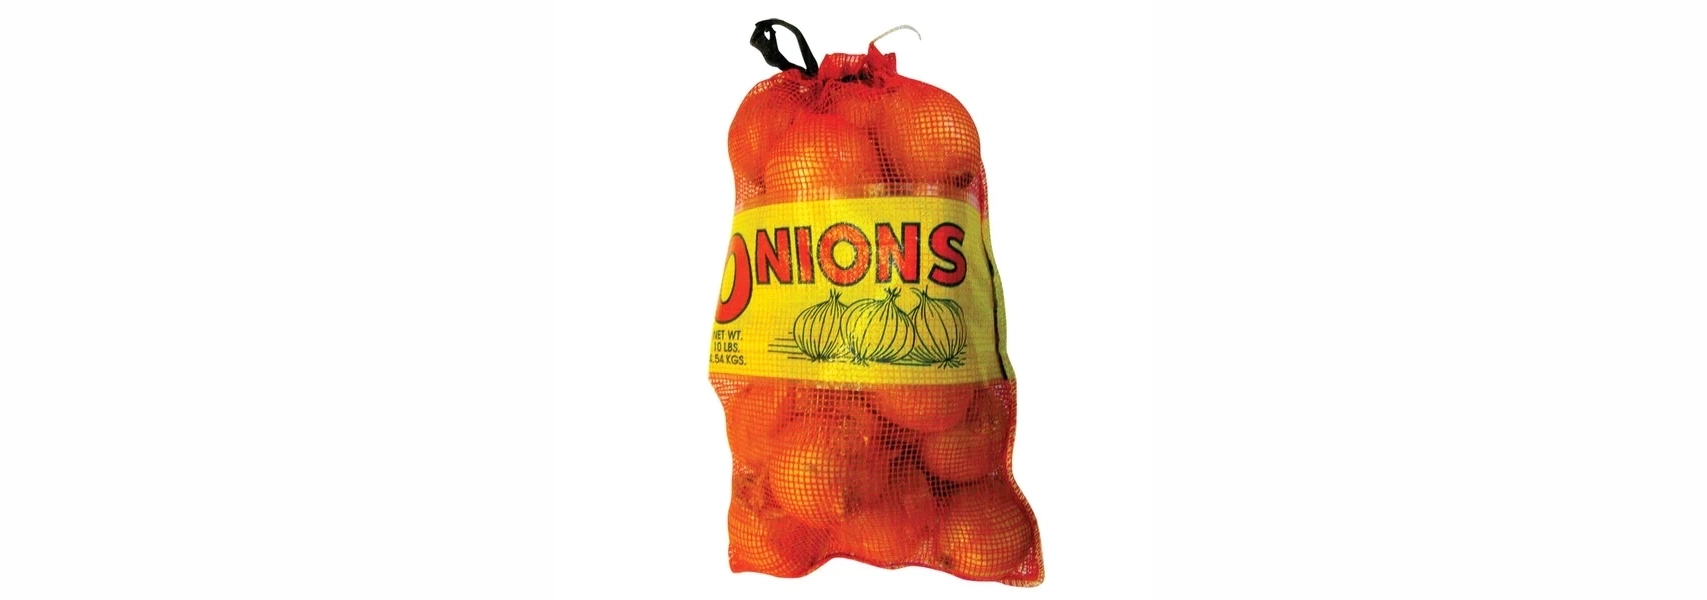 Mesh Bag used to store onions 